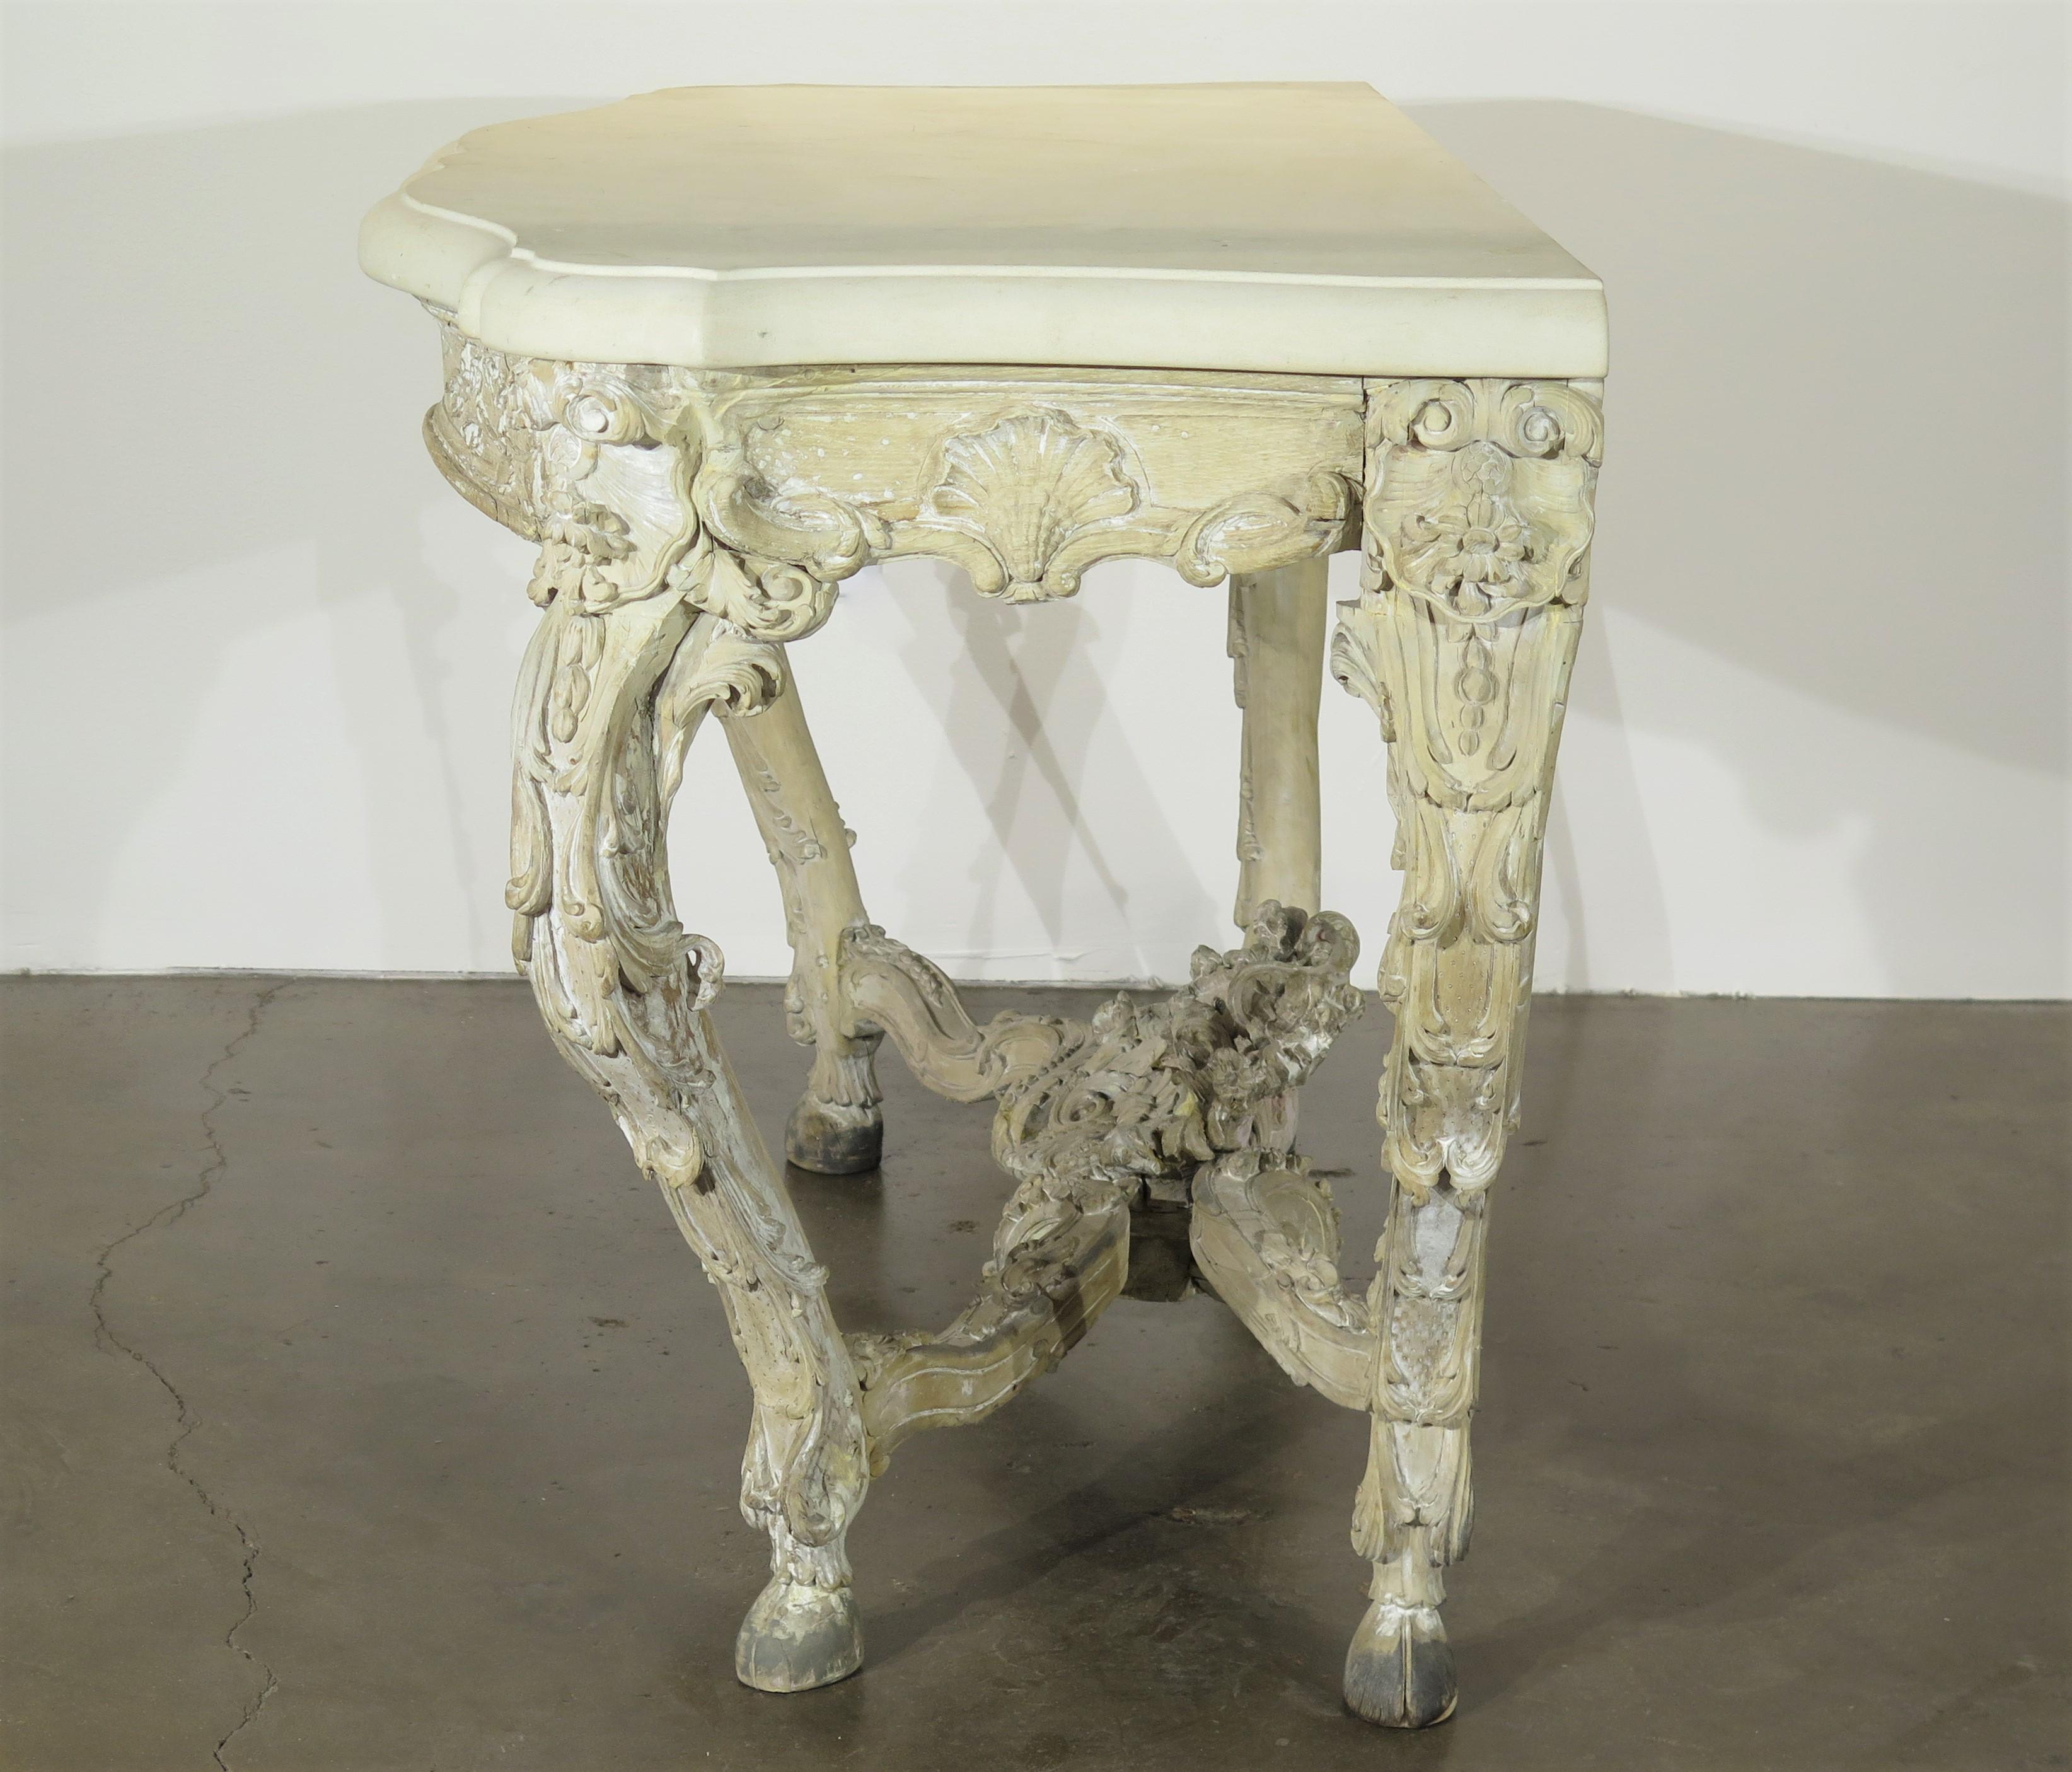 Hand-Carved Period Rococo Painted Console For Sale